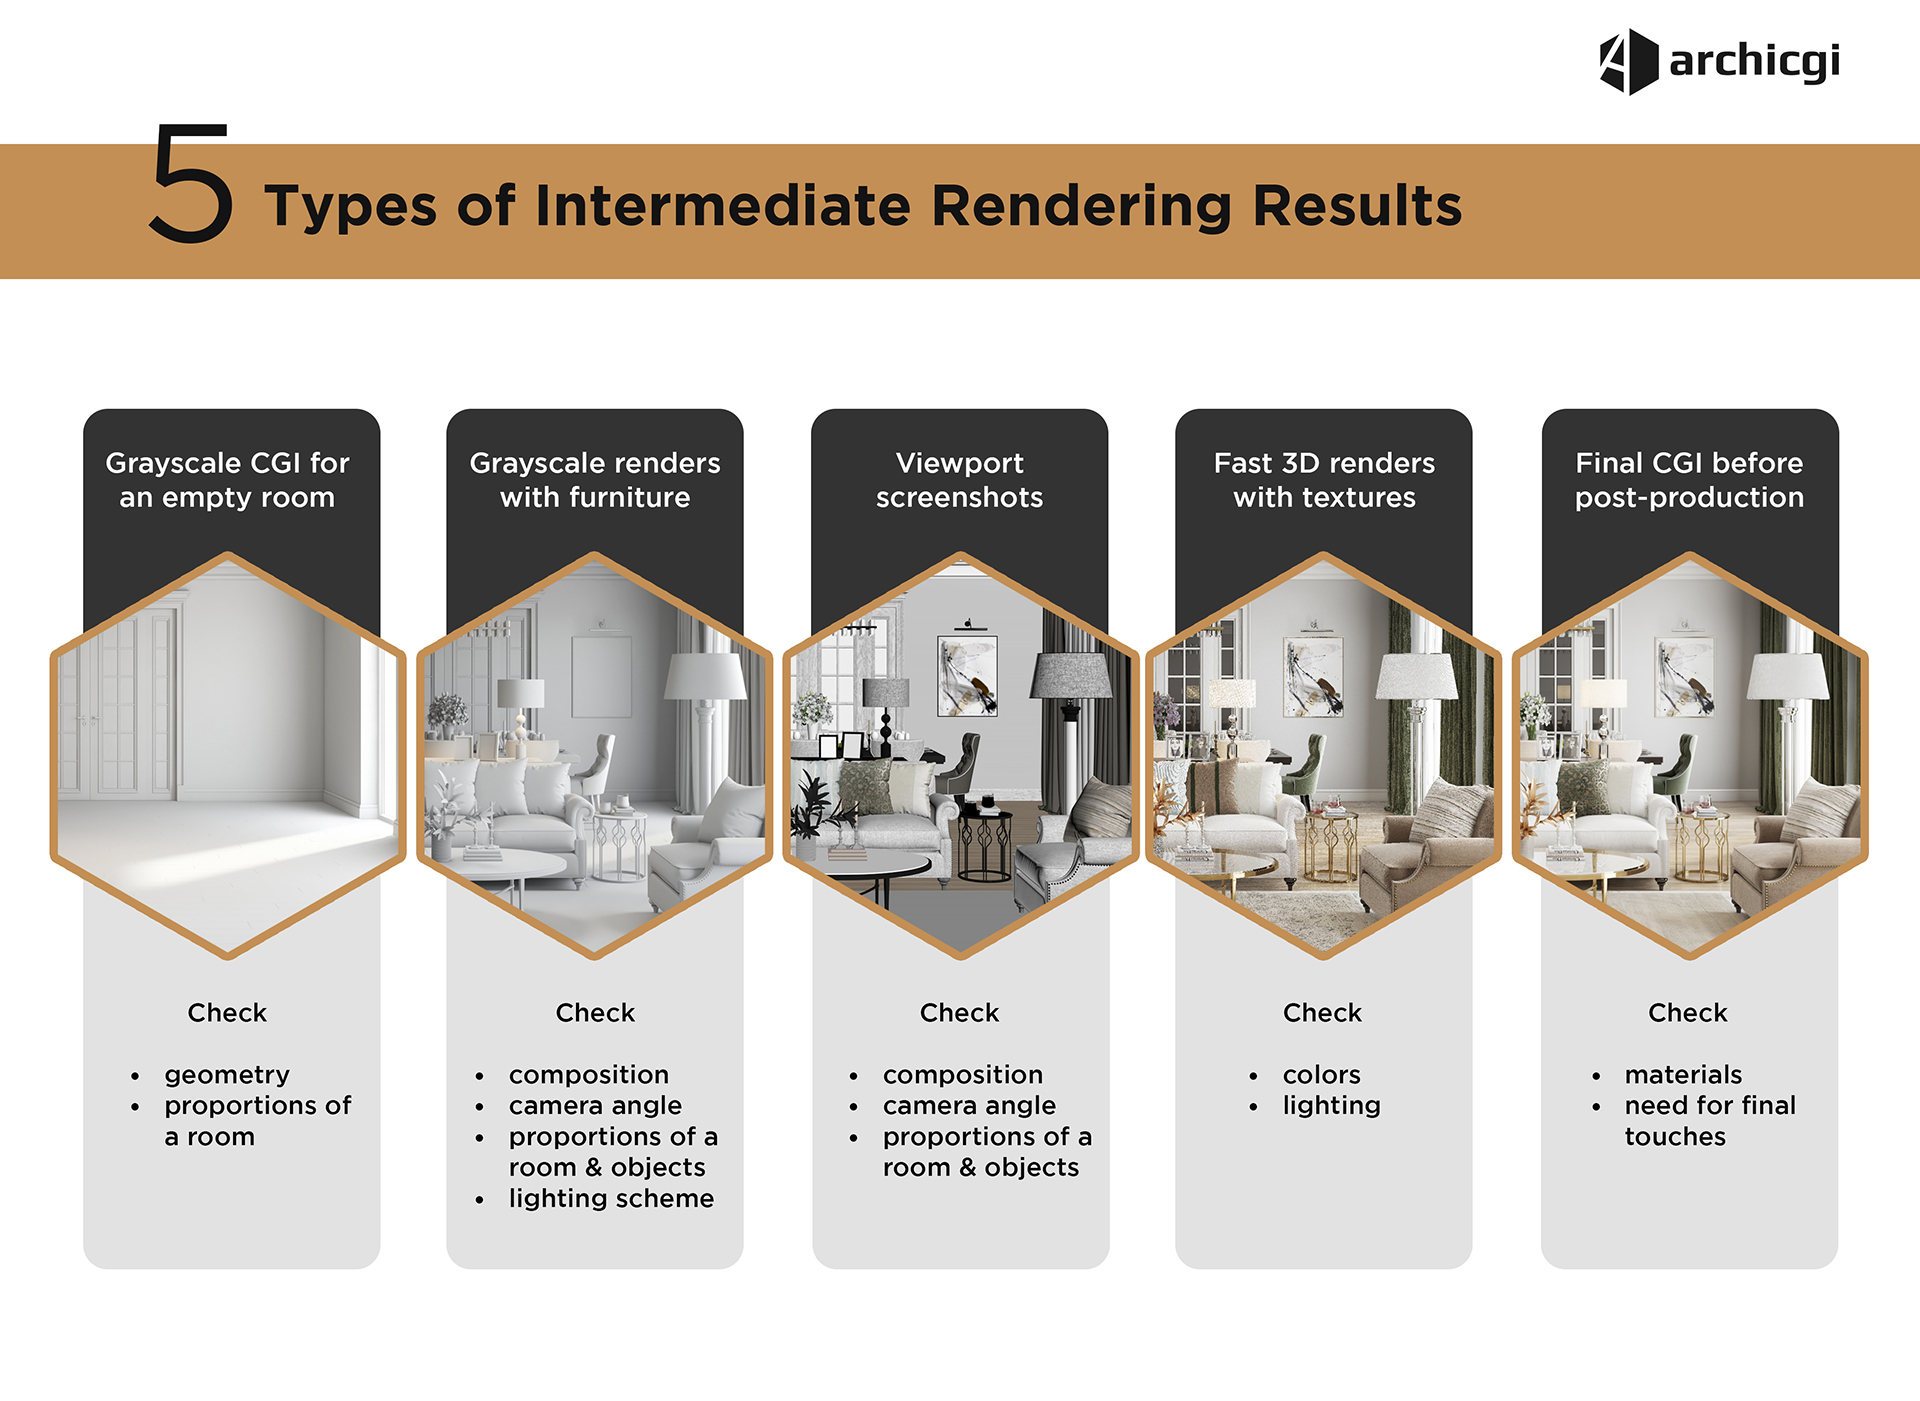 5 Types of Intermediate Results in an Architectural Visualization Project